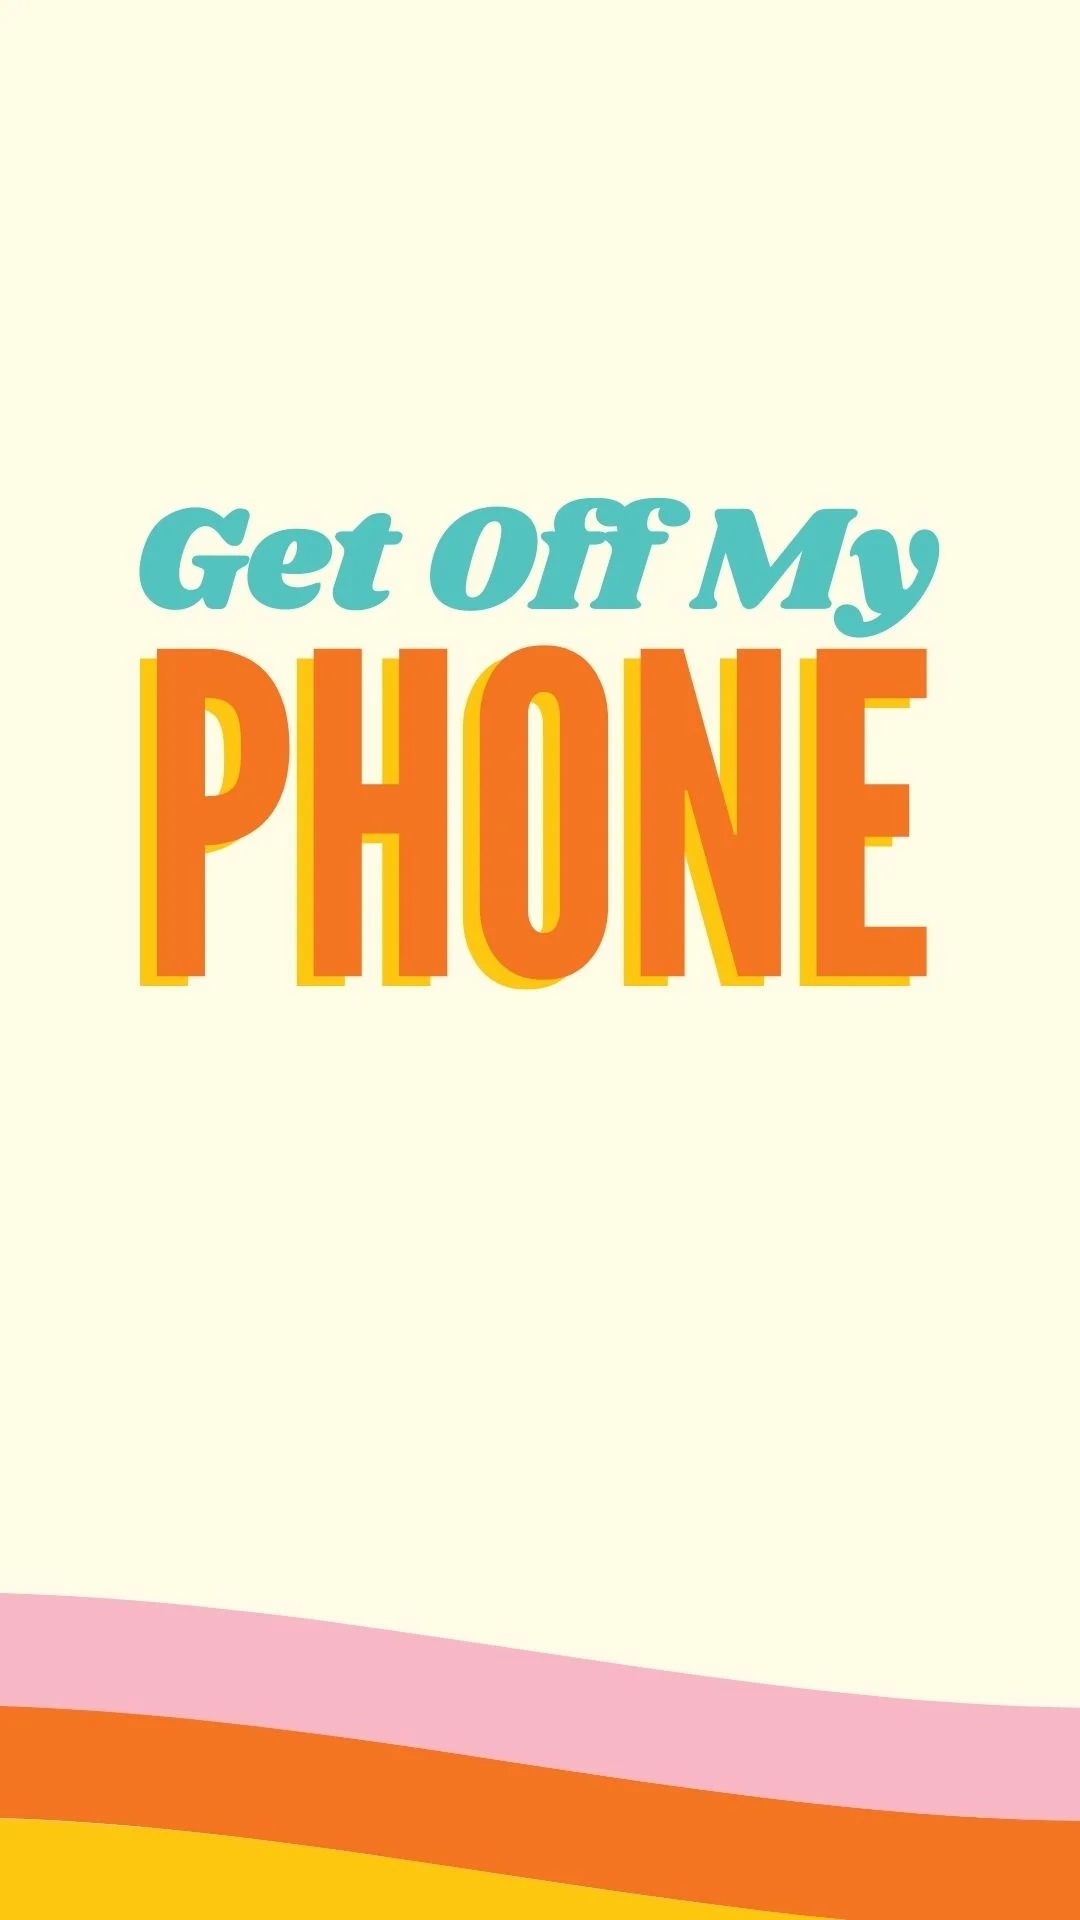 Get Off My Phone Wallpaper Images